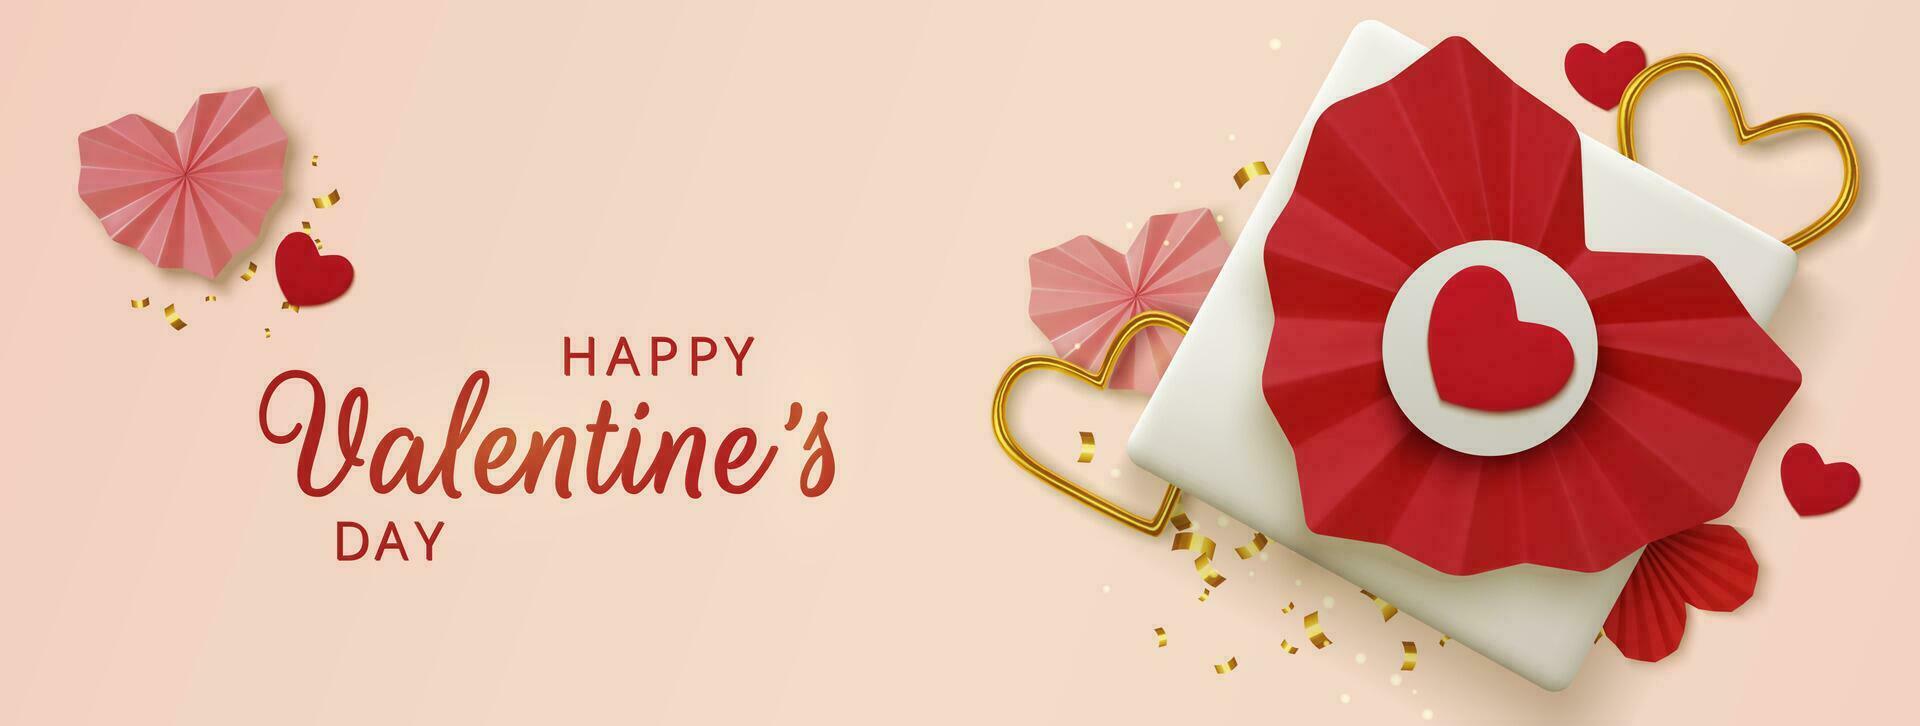 Valentines Day greeting card. Realistic 3d red paper hearts and gift on pink background. Love and wedding. Template for products, web banners and leaflets. Vector illustration